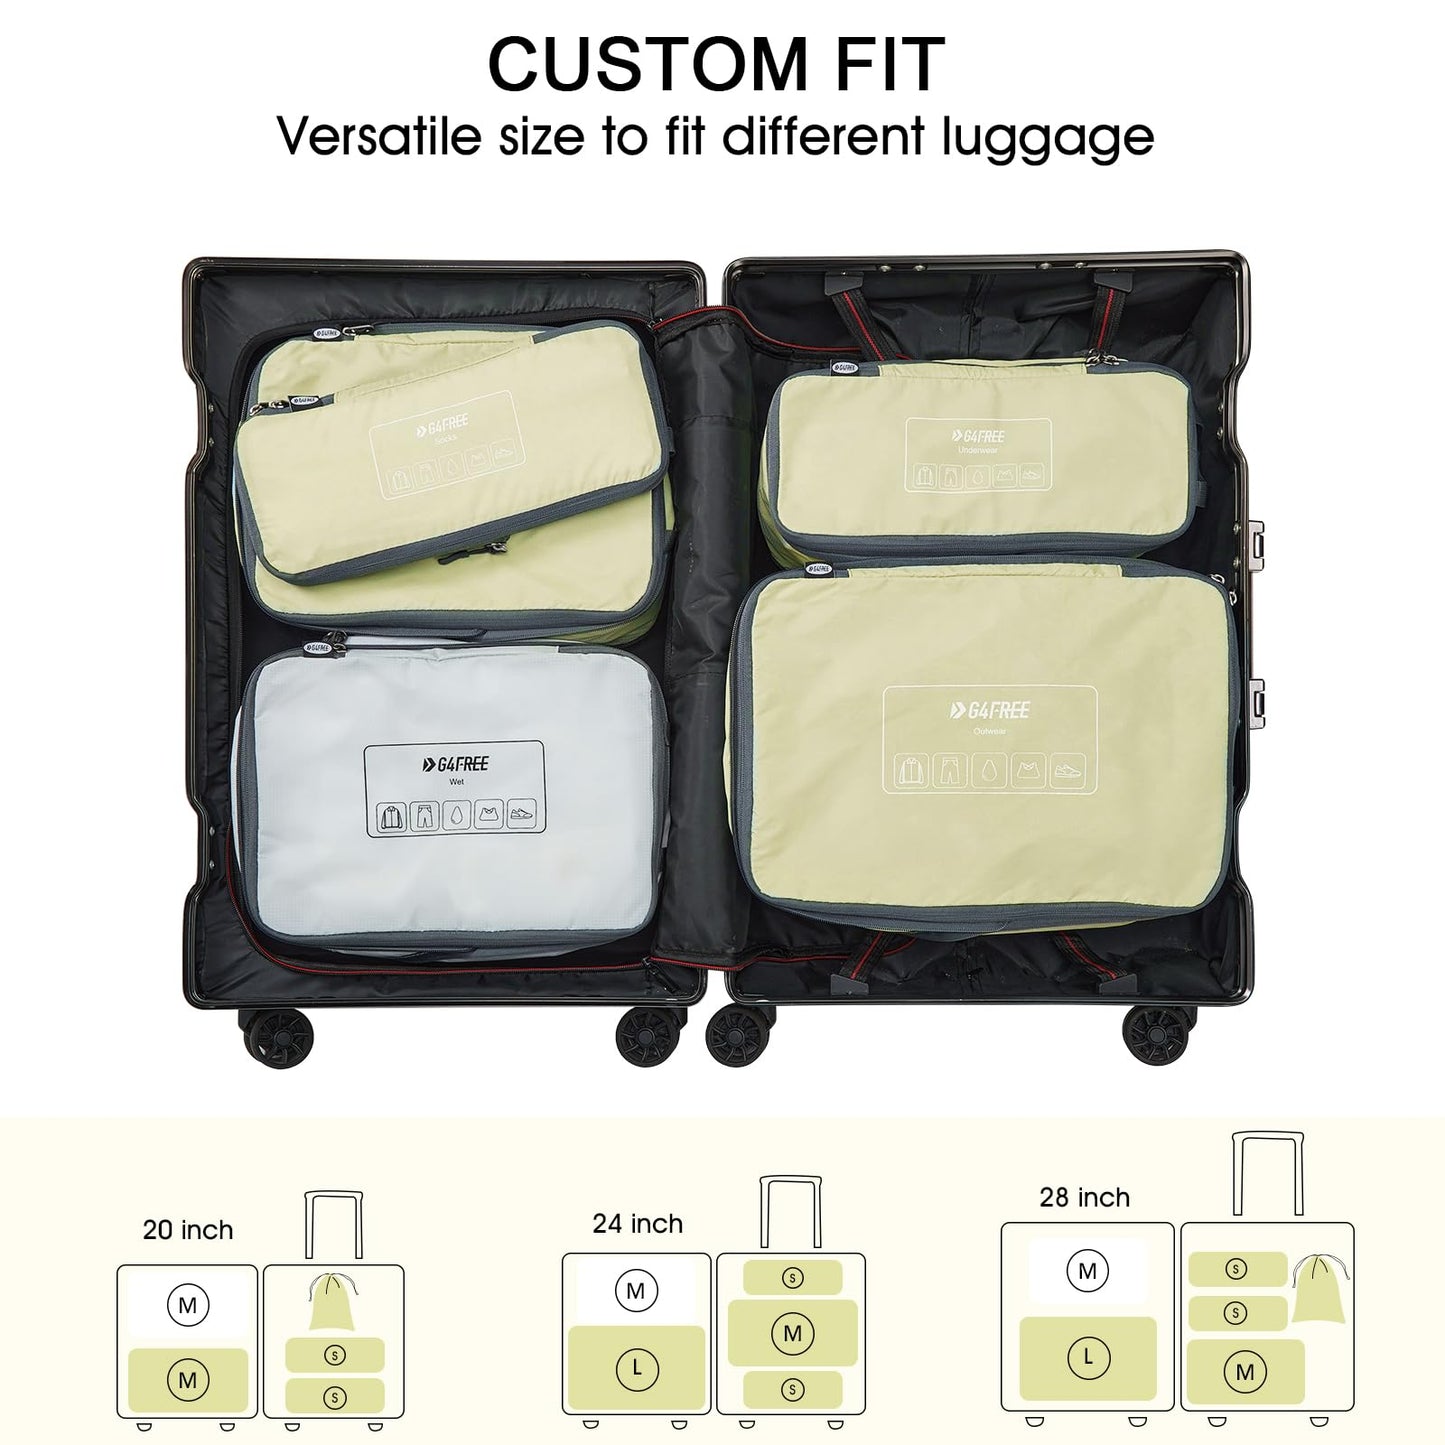 G4Free 6 Set Compression Packing Cube